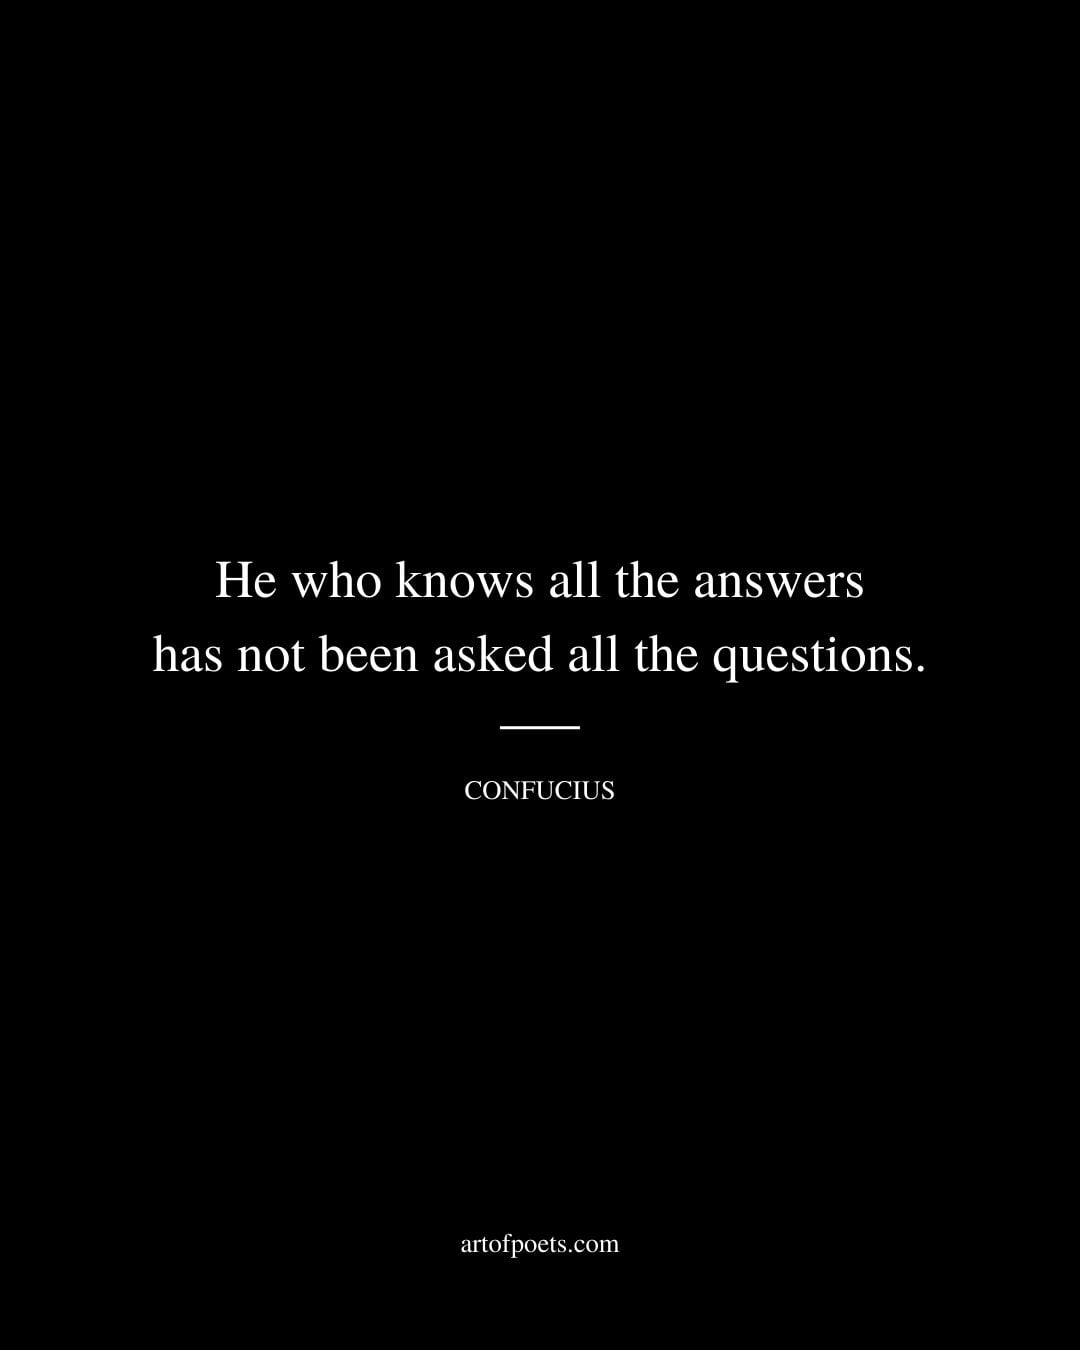 He who knows all the answers has not been asked all the questions